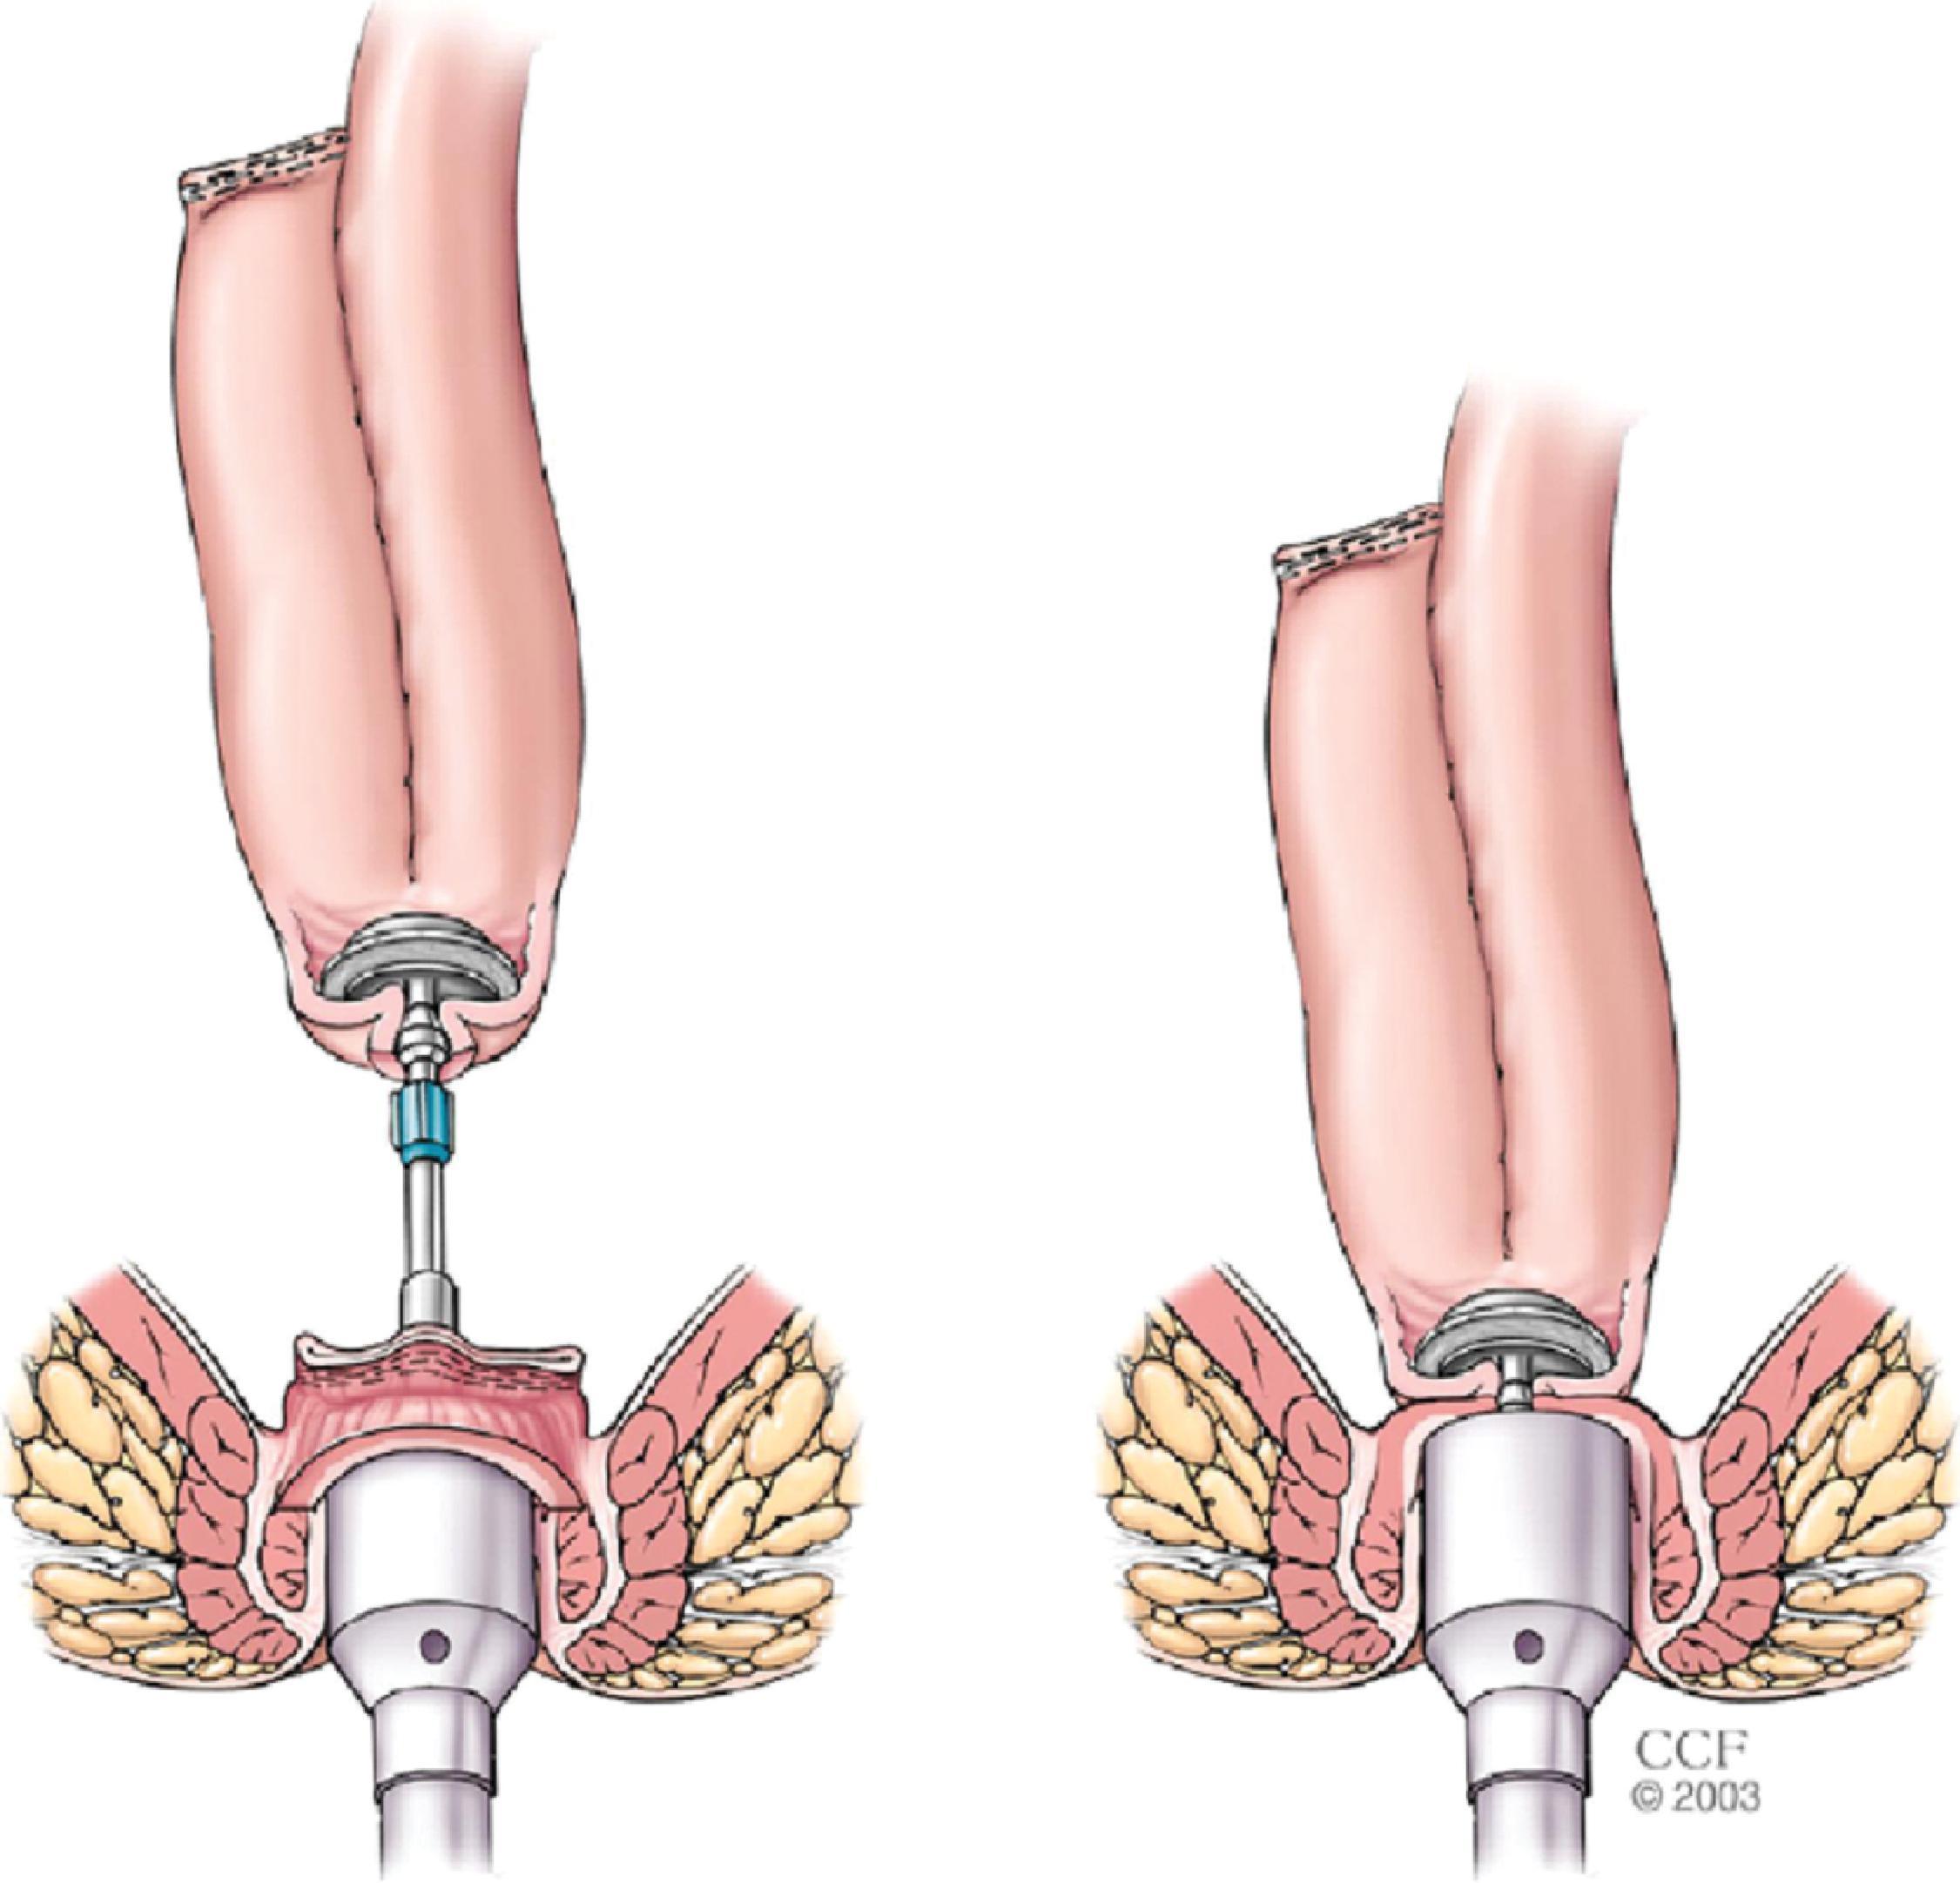 FIG. 2, Ileal pouch anal anastomosis creation using a circular stapler.